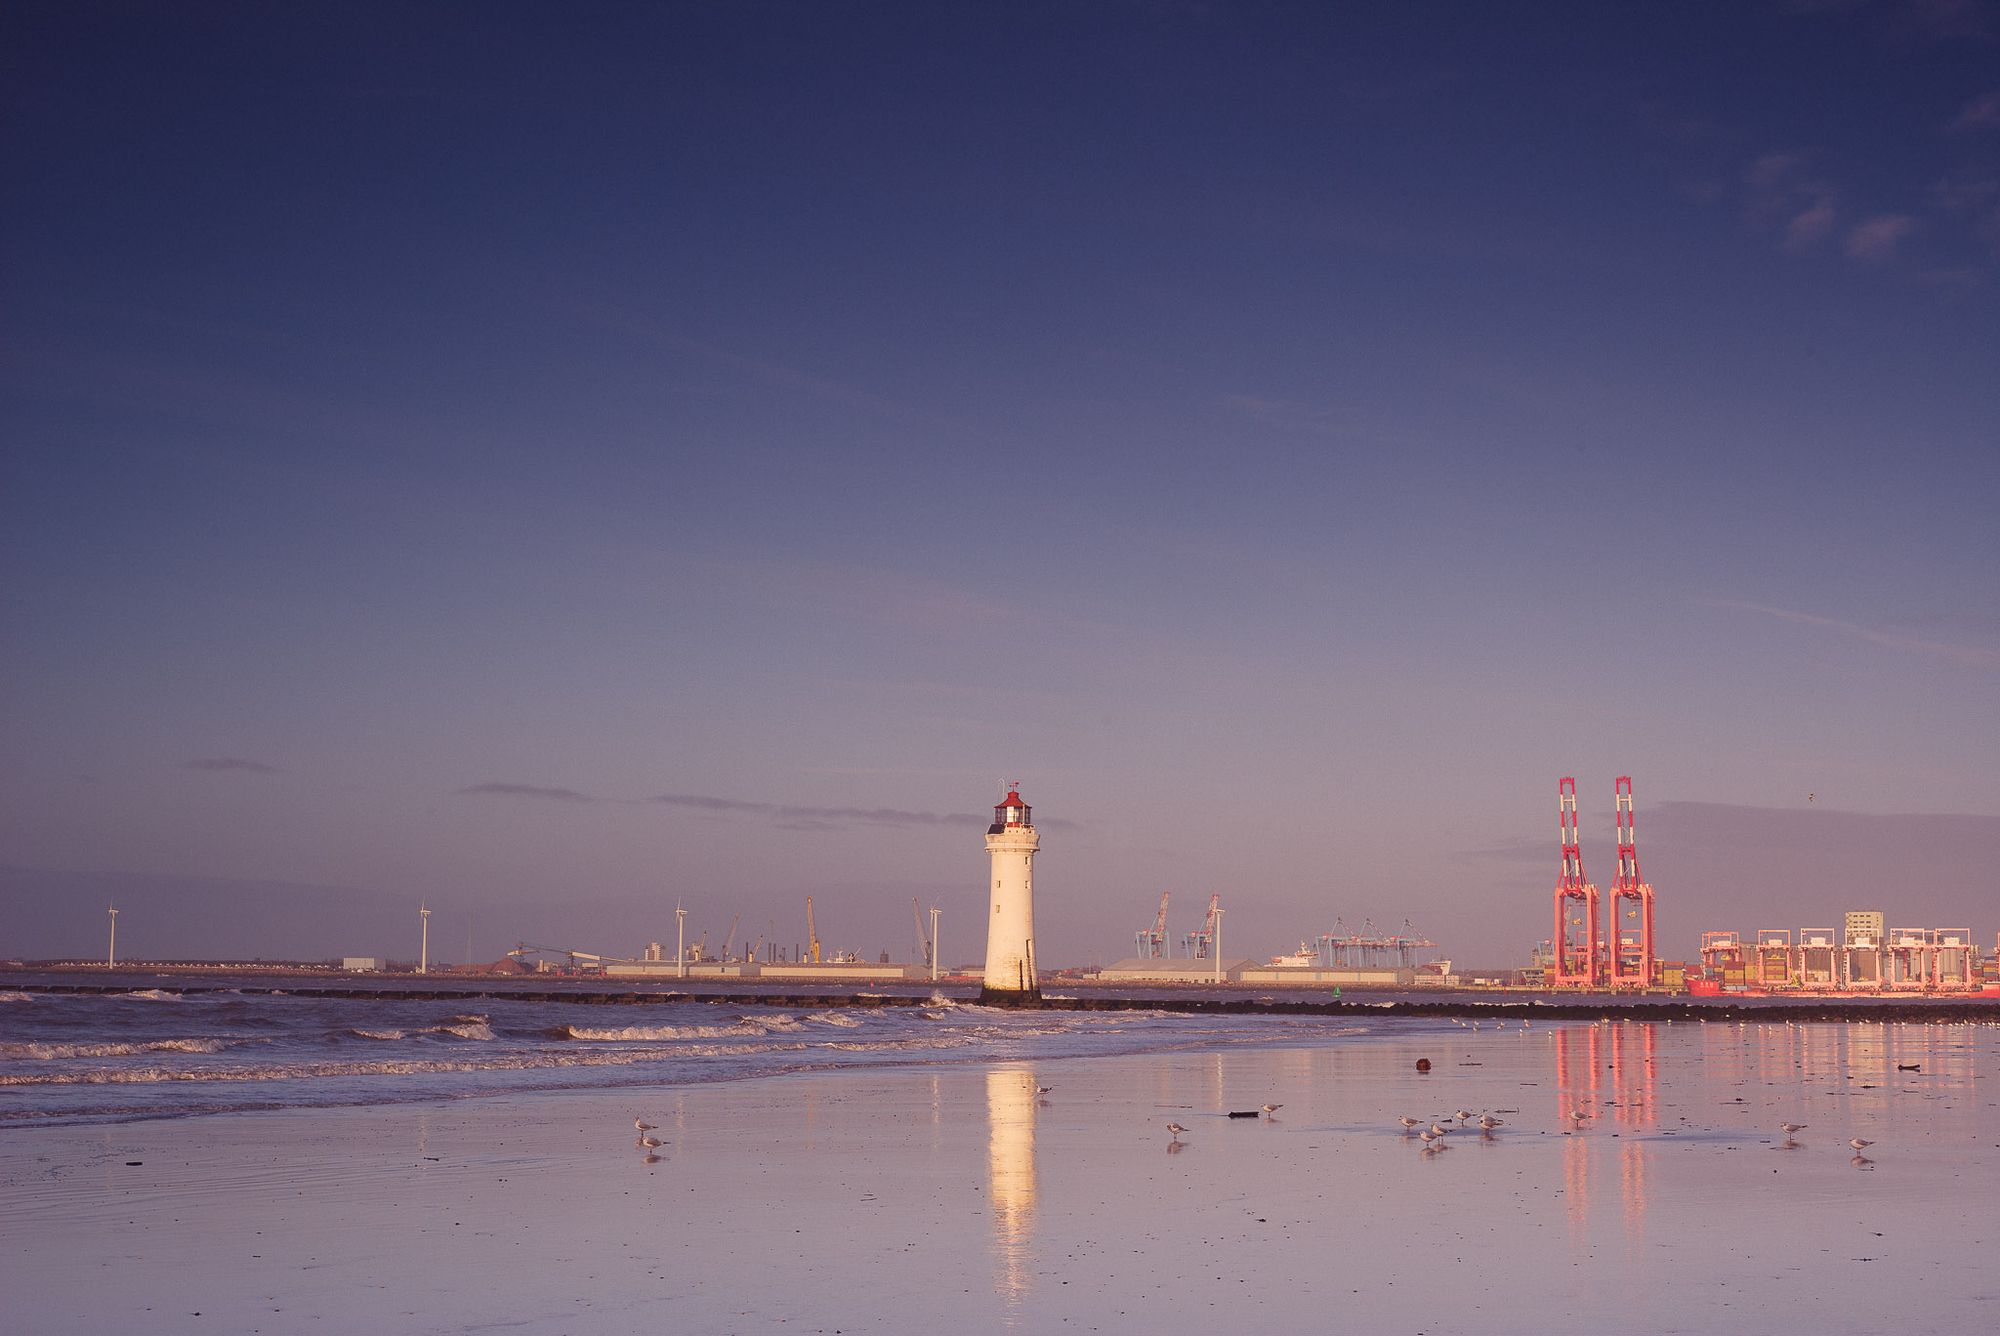 A lighthouse at sunset. It is reflected in the watery beach. There are seagulls resting on the beach and in the background a